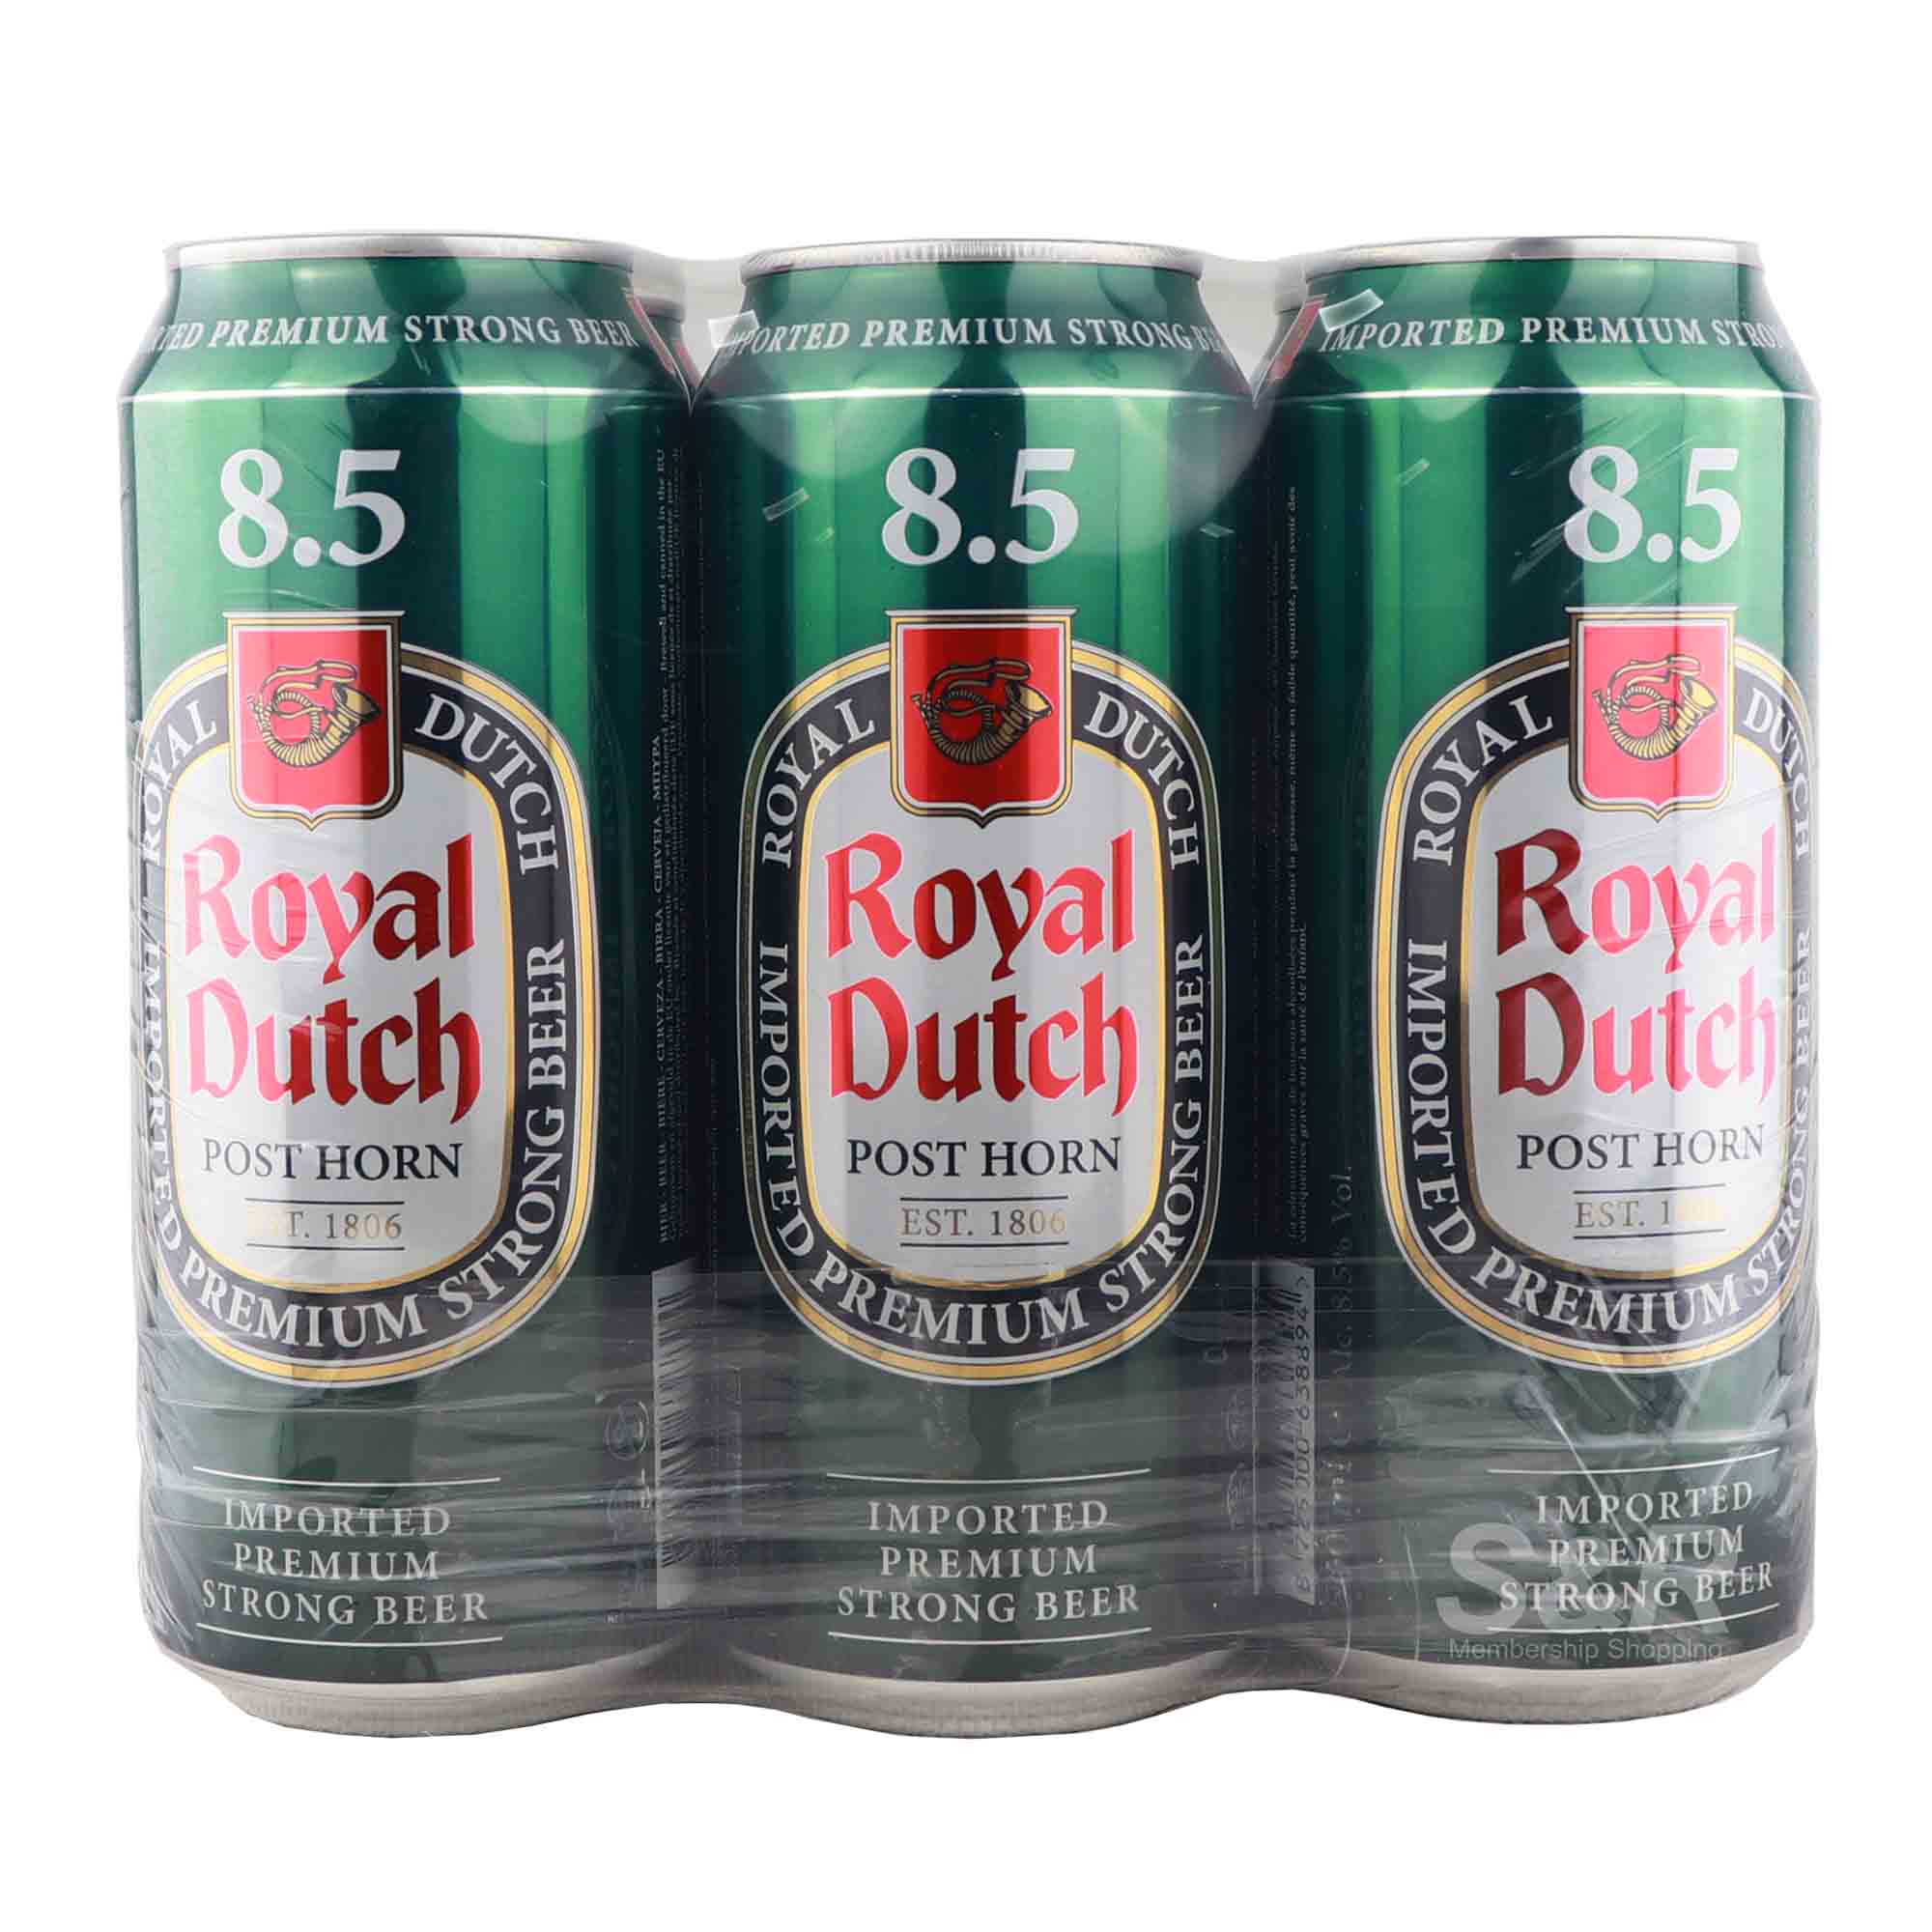 Royal Dutch Post Horn Imported Premium Strong Beer 6 cans